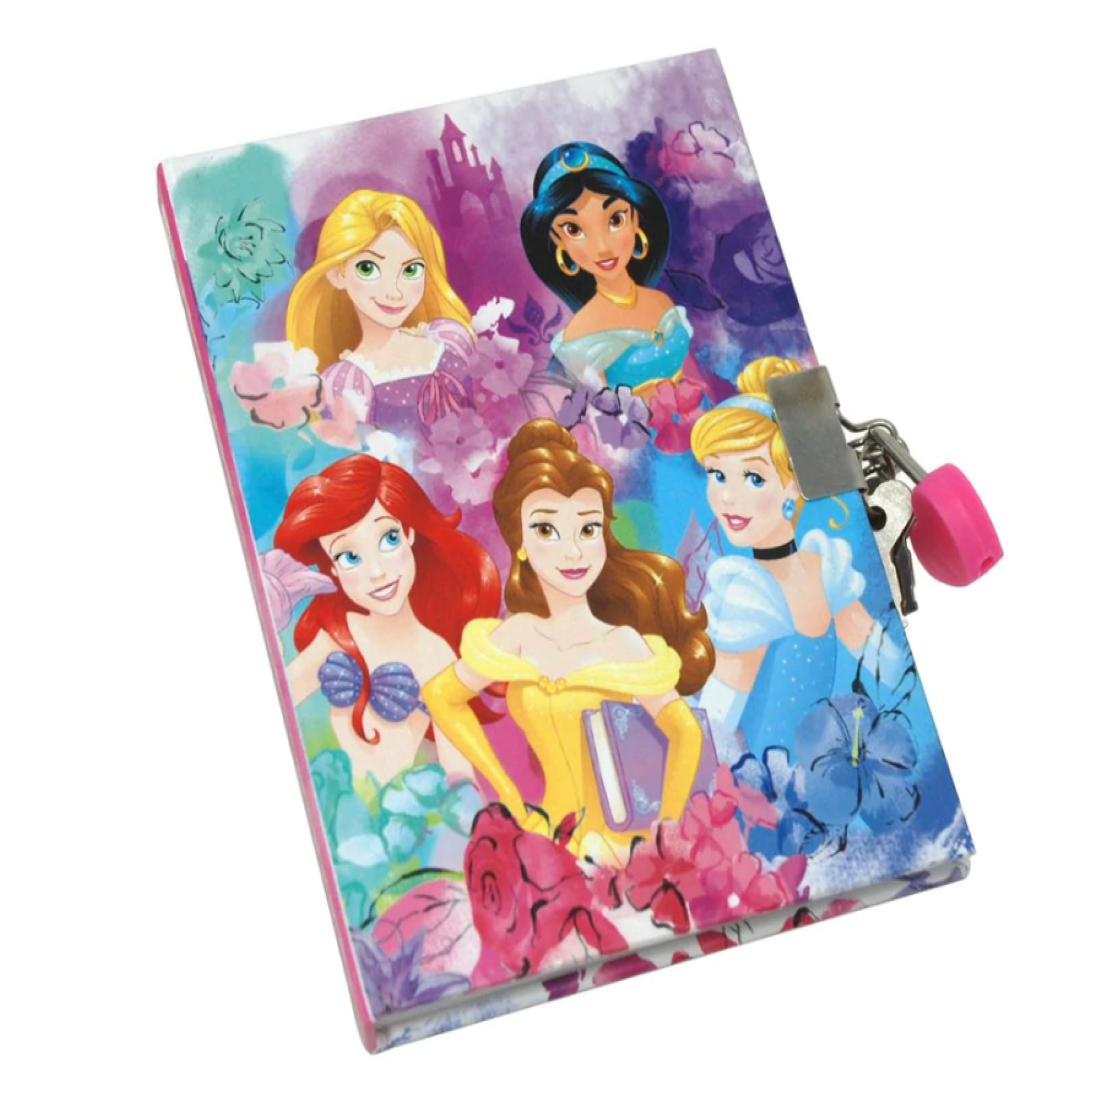 Inspired by Disney Princess, writing has never been more fun with this Princess-scented lockable diary